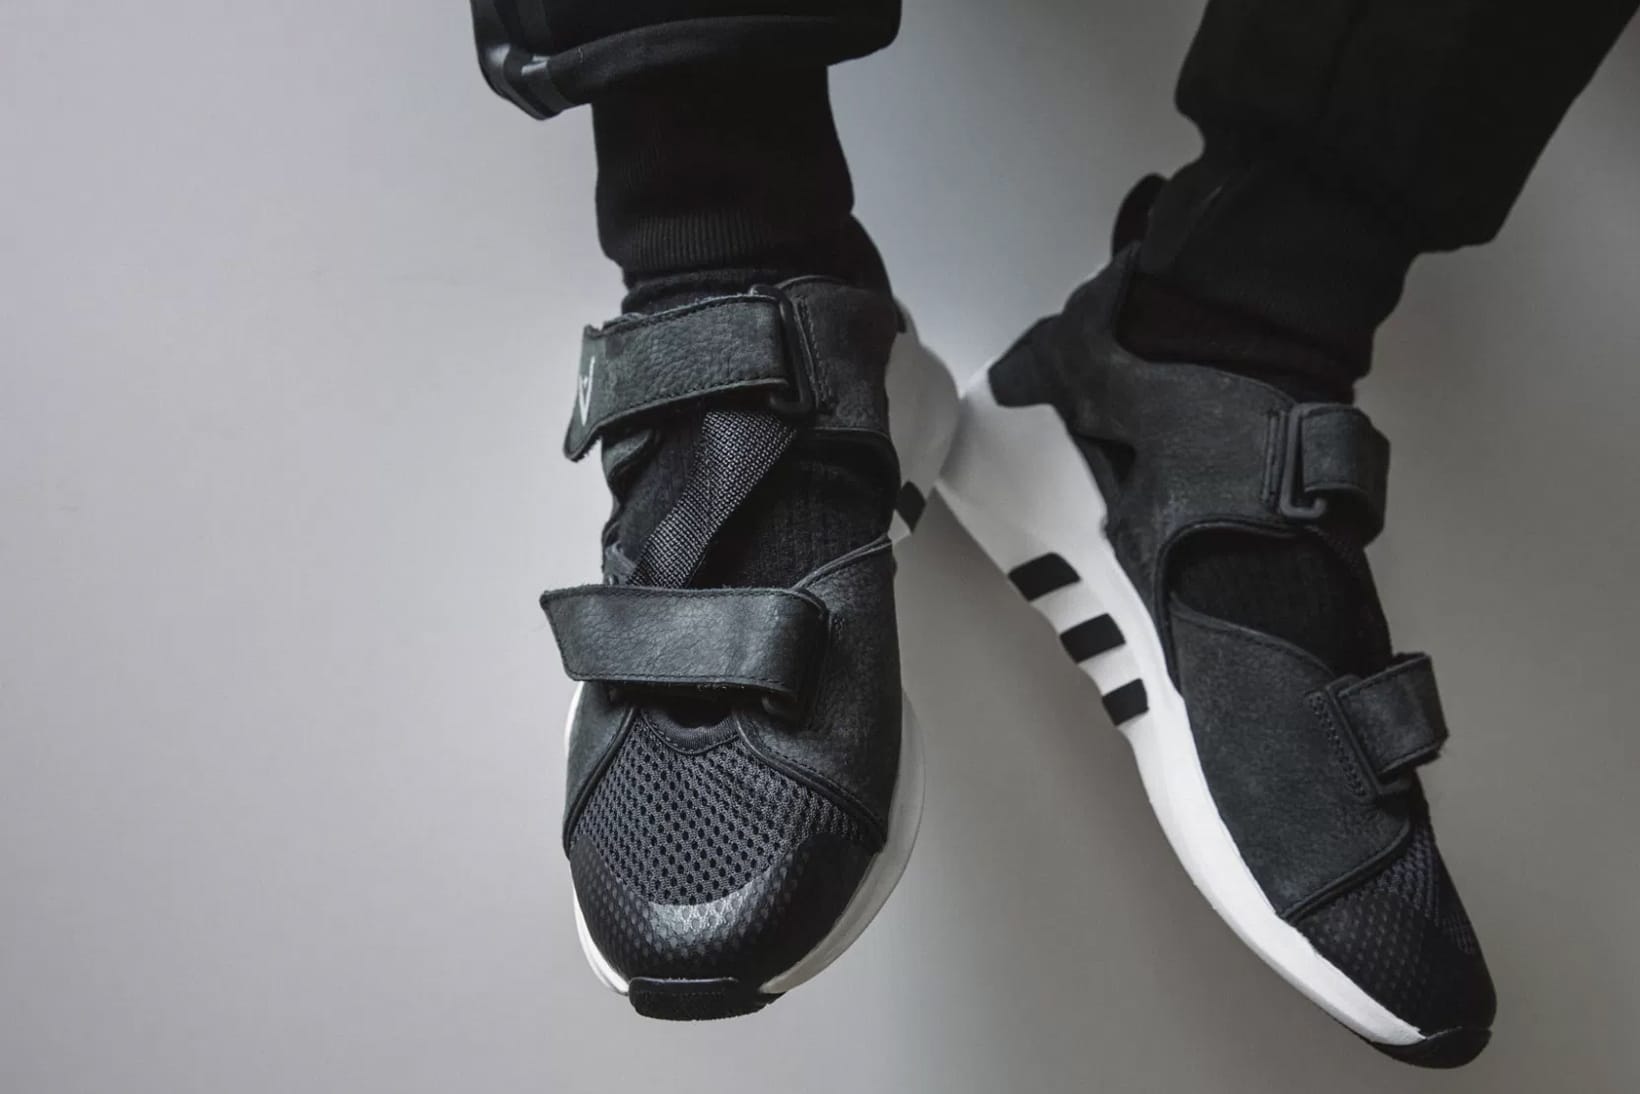 White Mountaineering x adidas Originals Footwear Collection | HYPEBEAST